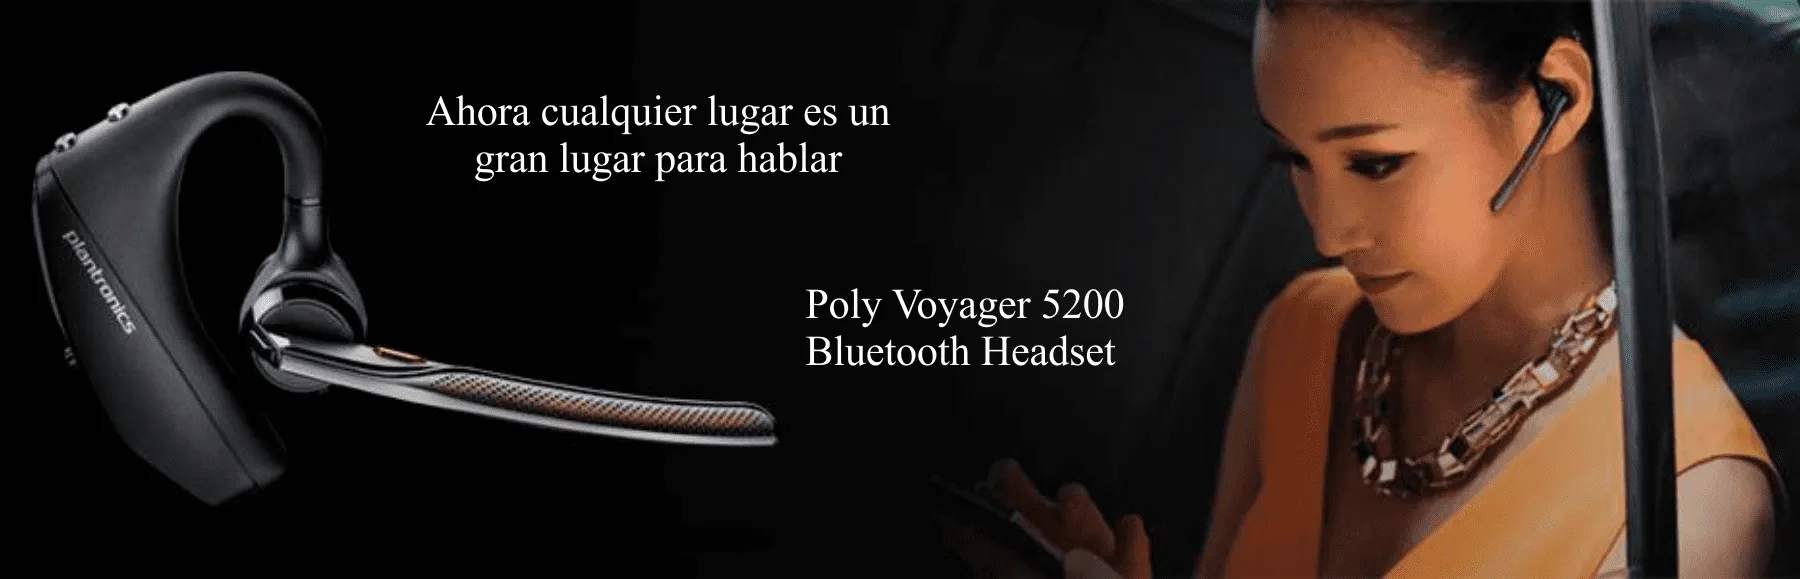 Productos Poly